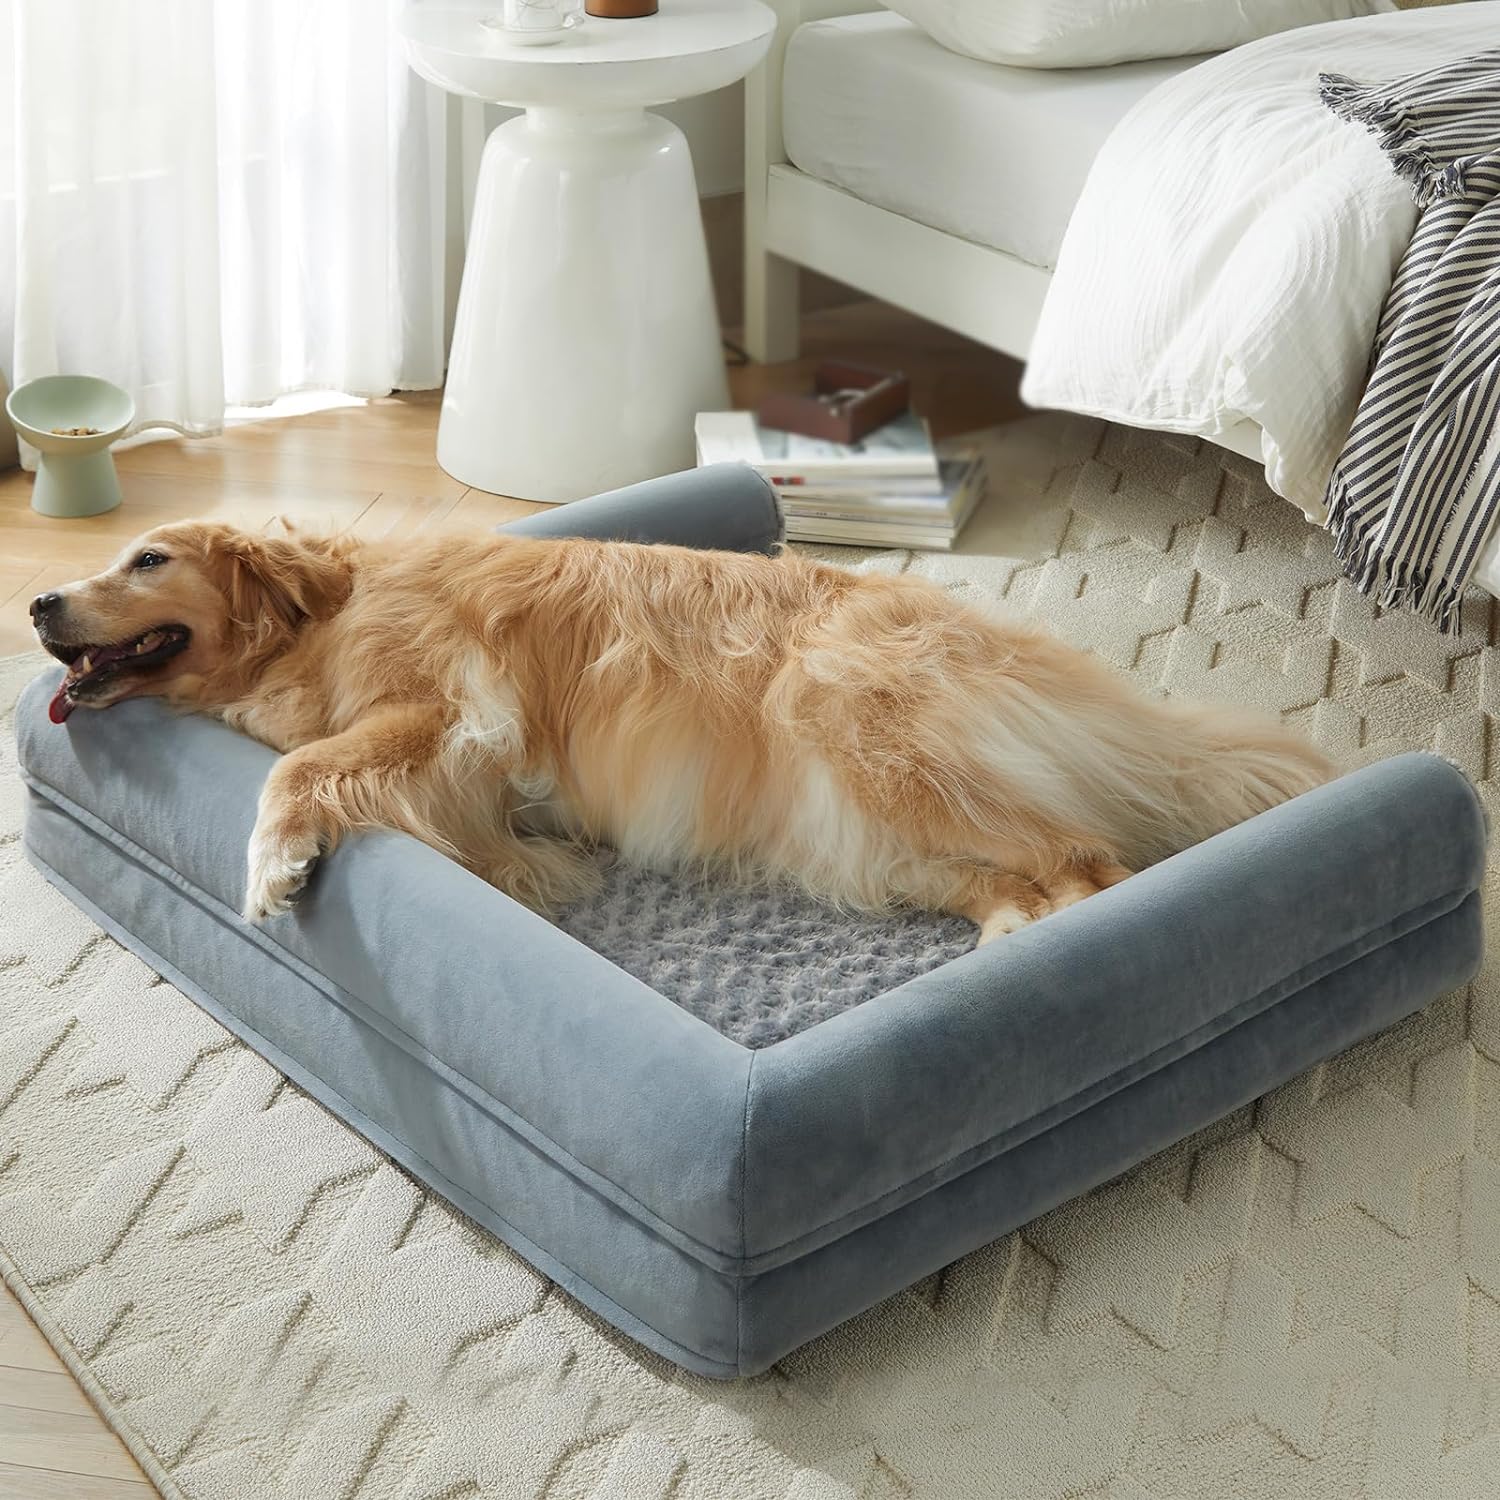 LNSSFFER Orthopedic Dog Bed Large Big Comfy Pet Couch Sofa Bed with Removable Washable Cover Nonskid Bottom for Medium Large Jumbo Dogs Sleeping, Gray